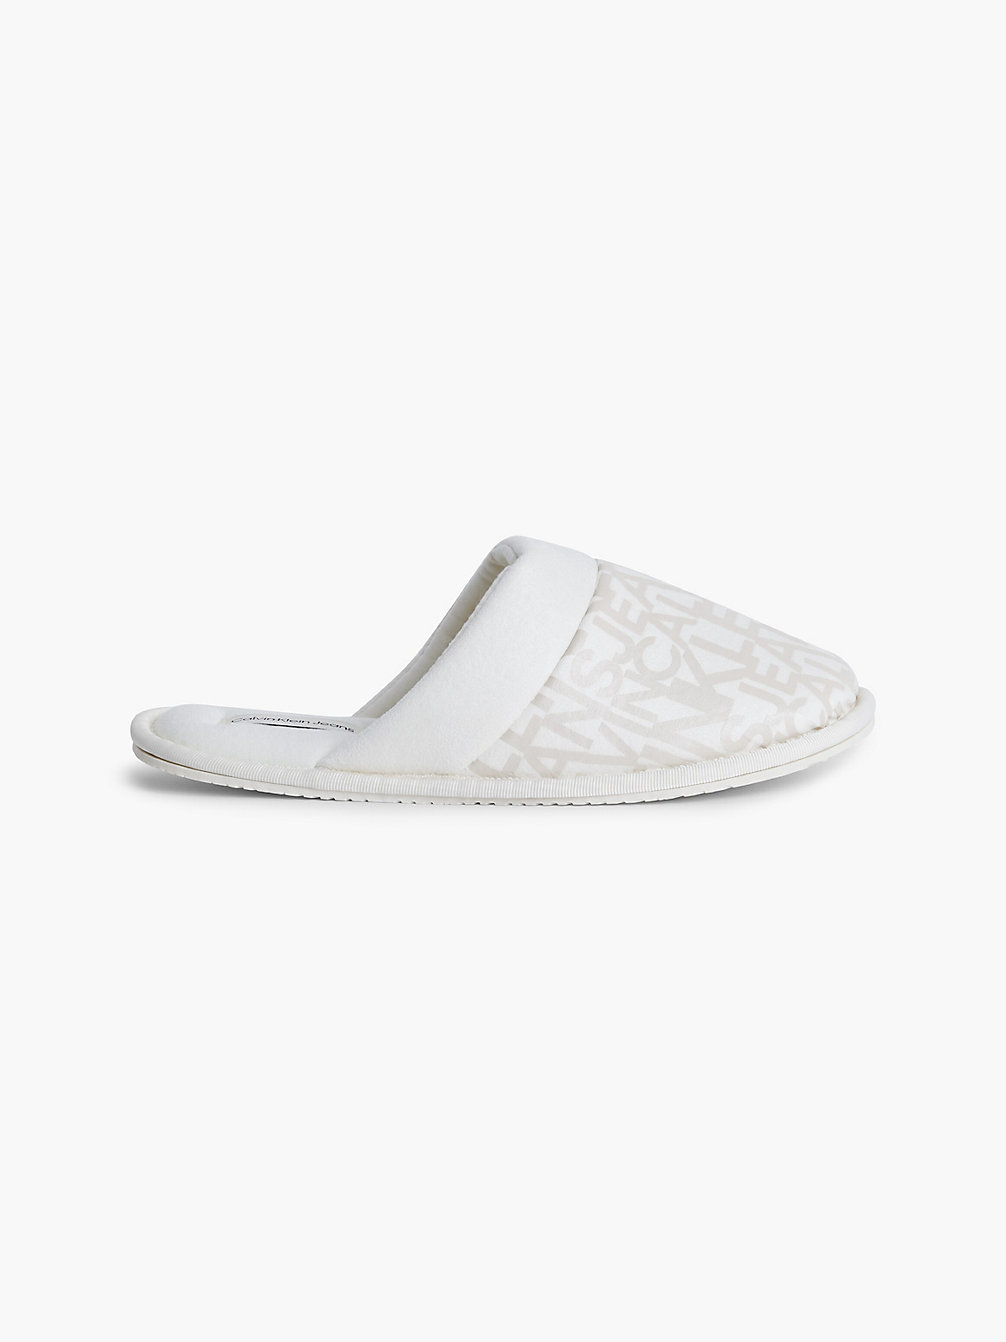 OFFWHITE AOP Recycled Slippers undefined women Calvin Klein